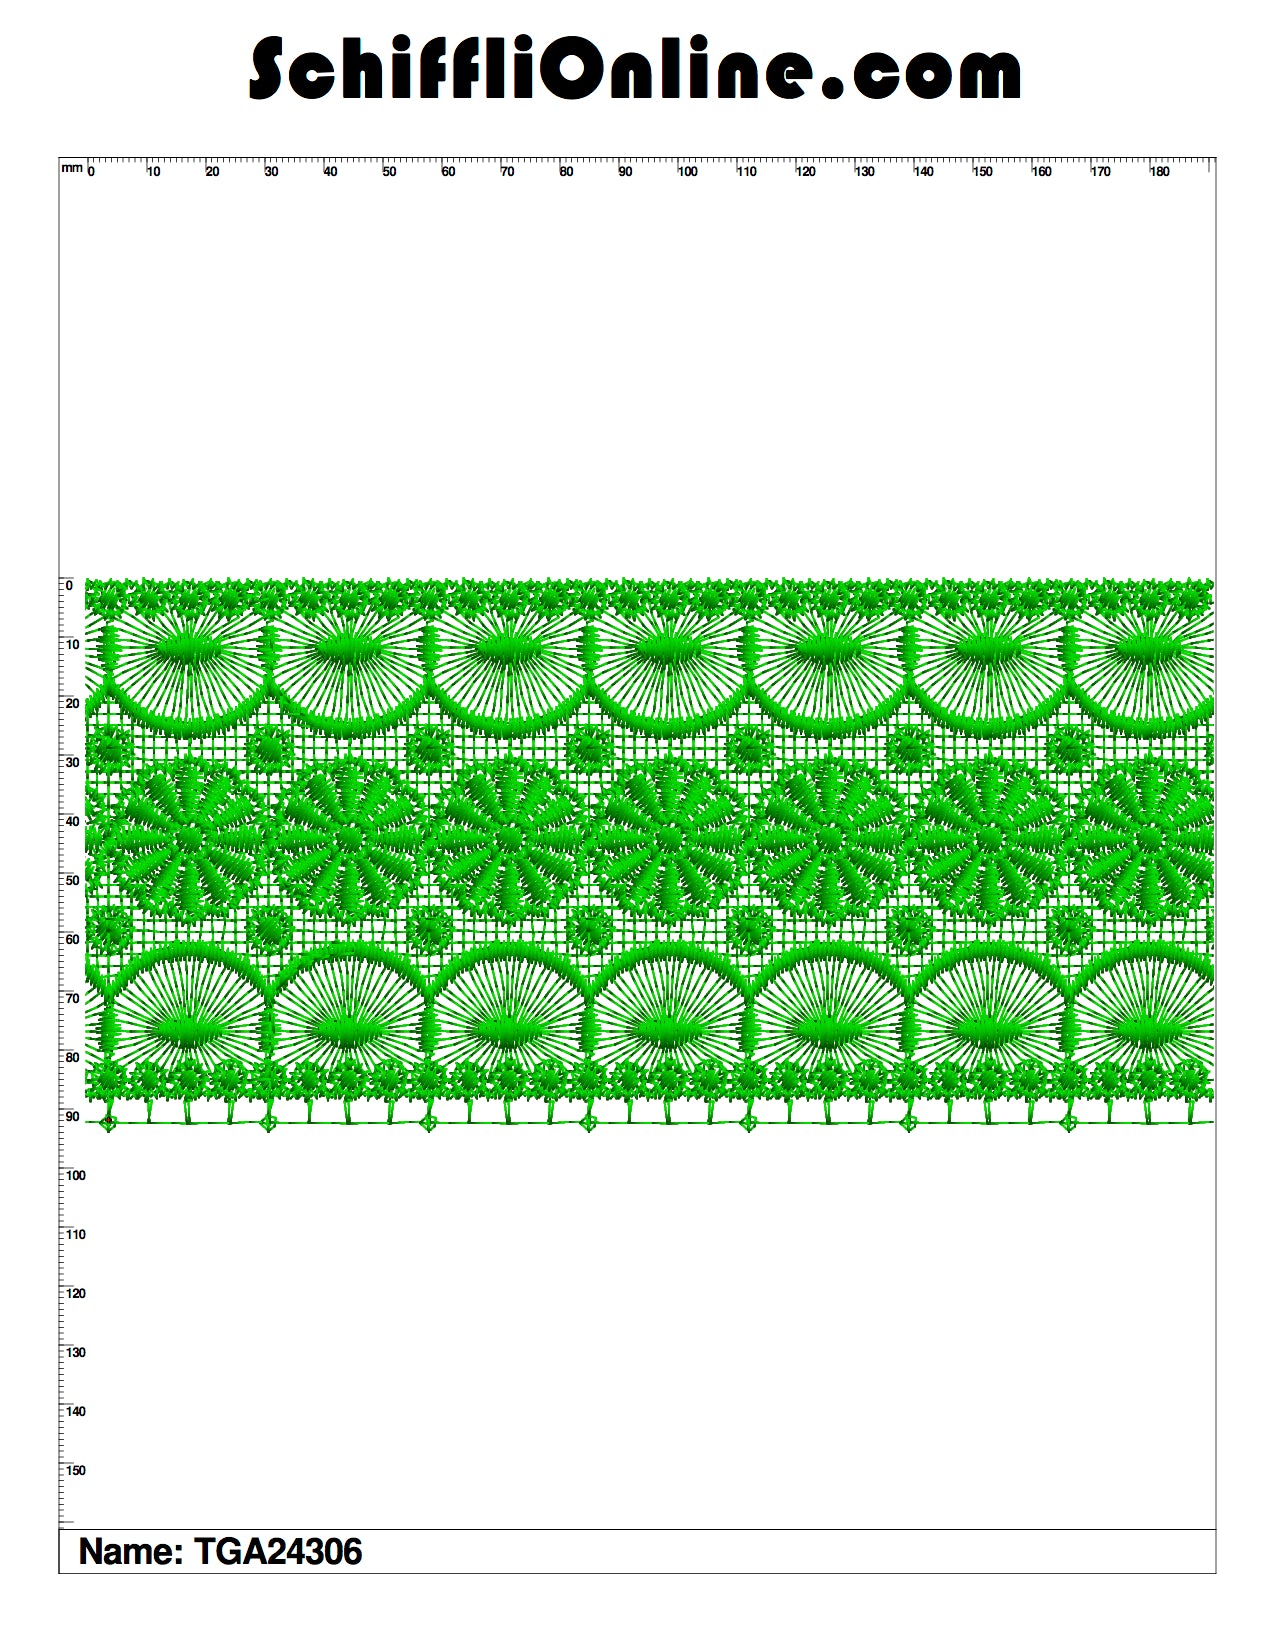 Book 116 CHEMICAL LACE 4X4 50 DESIGNS